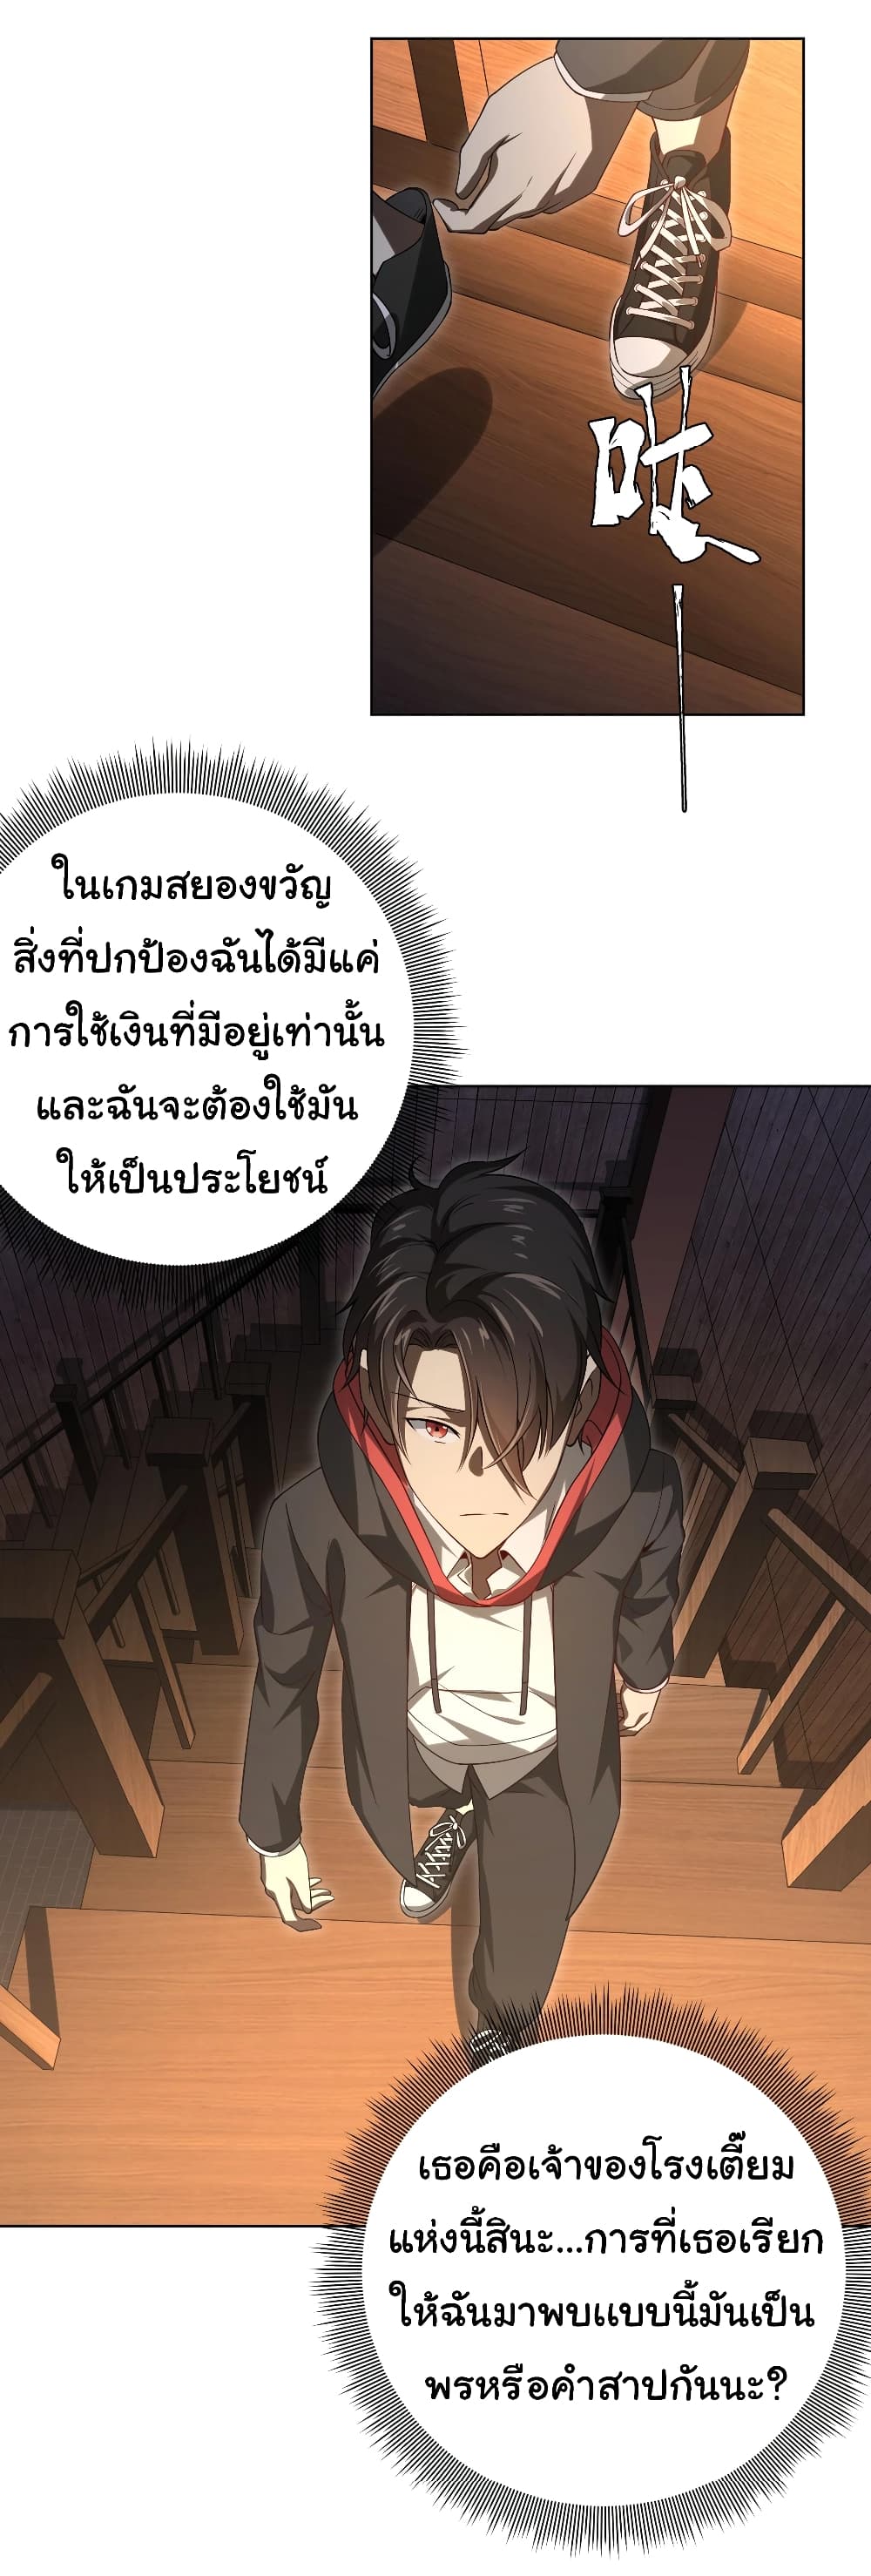 Start with Trillions of Coins ตอนที่ 8 (19)